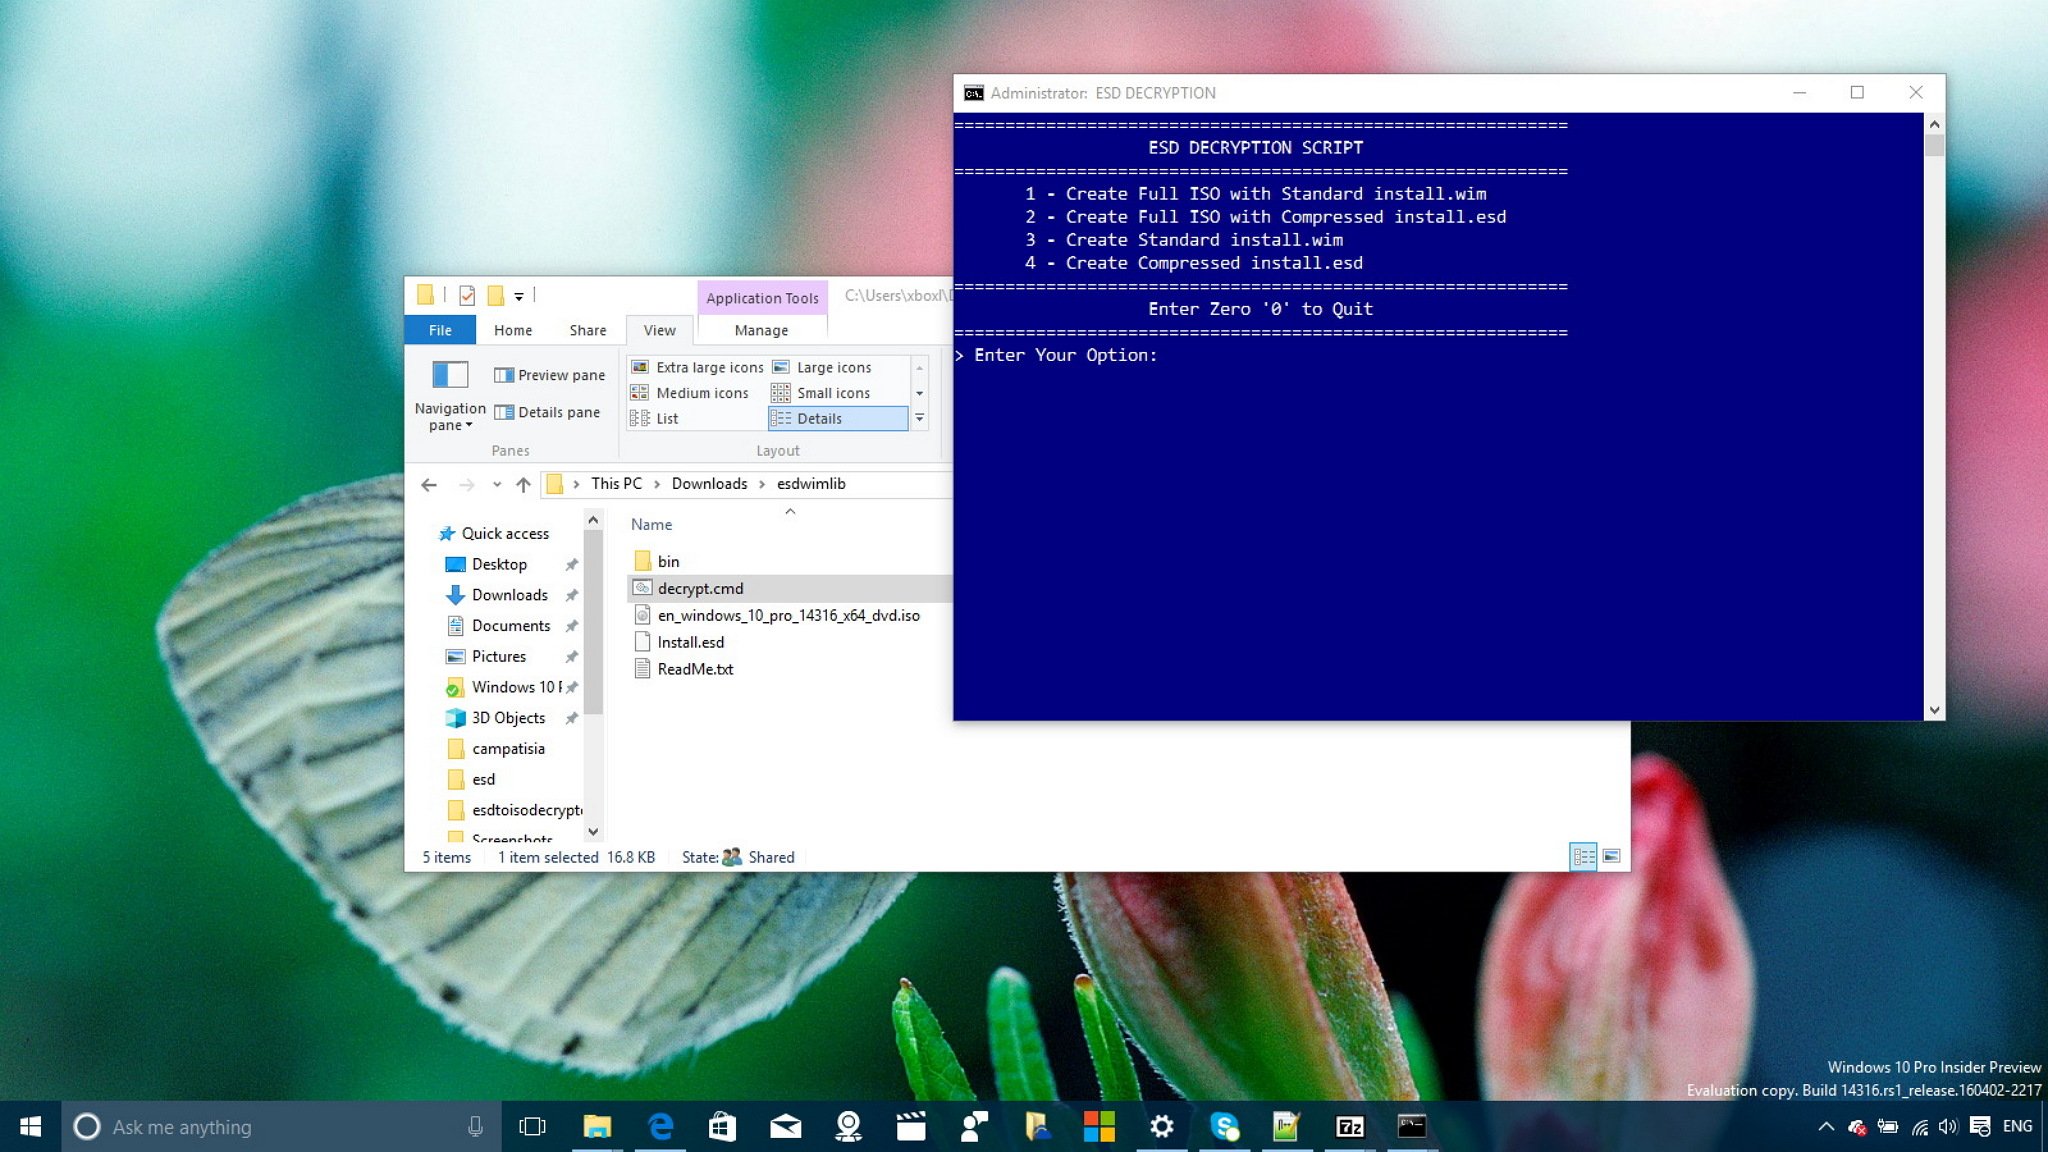 How to create a Windows 12 ISO file using an Install.ESD image